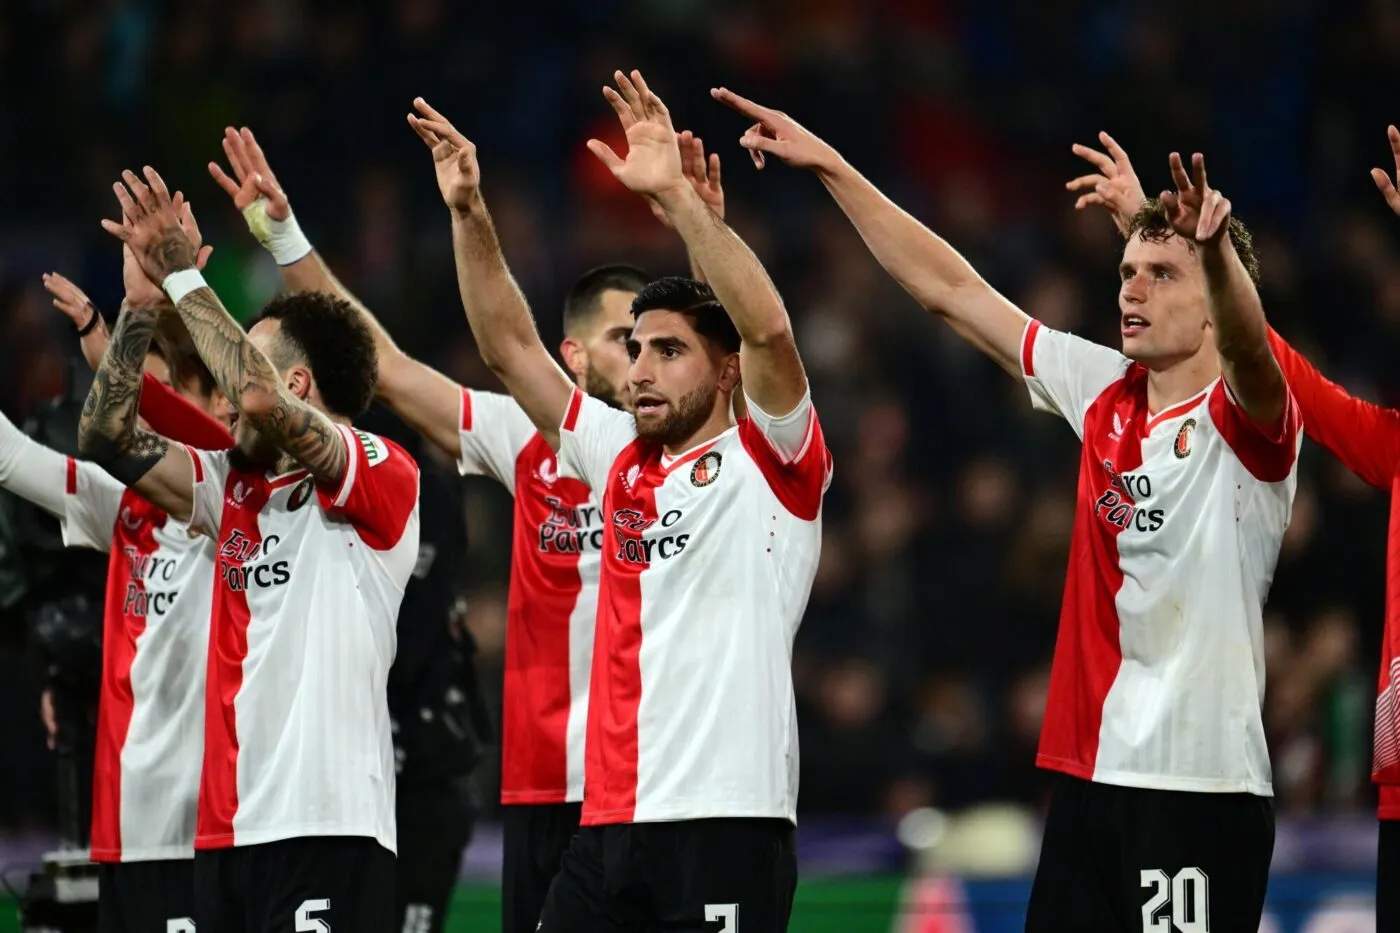 ROTTERDAM - (l-r) Alireza Jahanbaksh of Feyenoord, Mats Wieffer of Feyenoord celebrate the 3-1 victory after the UEFA Champions League match in group E between Feyenoord and Lazio Roma at Feyenoord Stadium de Kuip on October 25, 2023 in Rotterdam, the Netherlands. ANP OLAF KRAAK - Photo by Icon sport